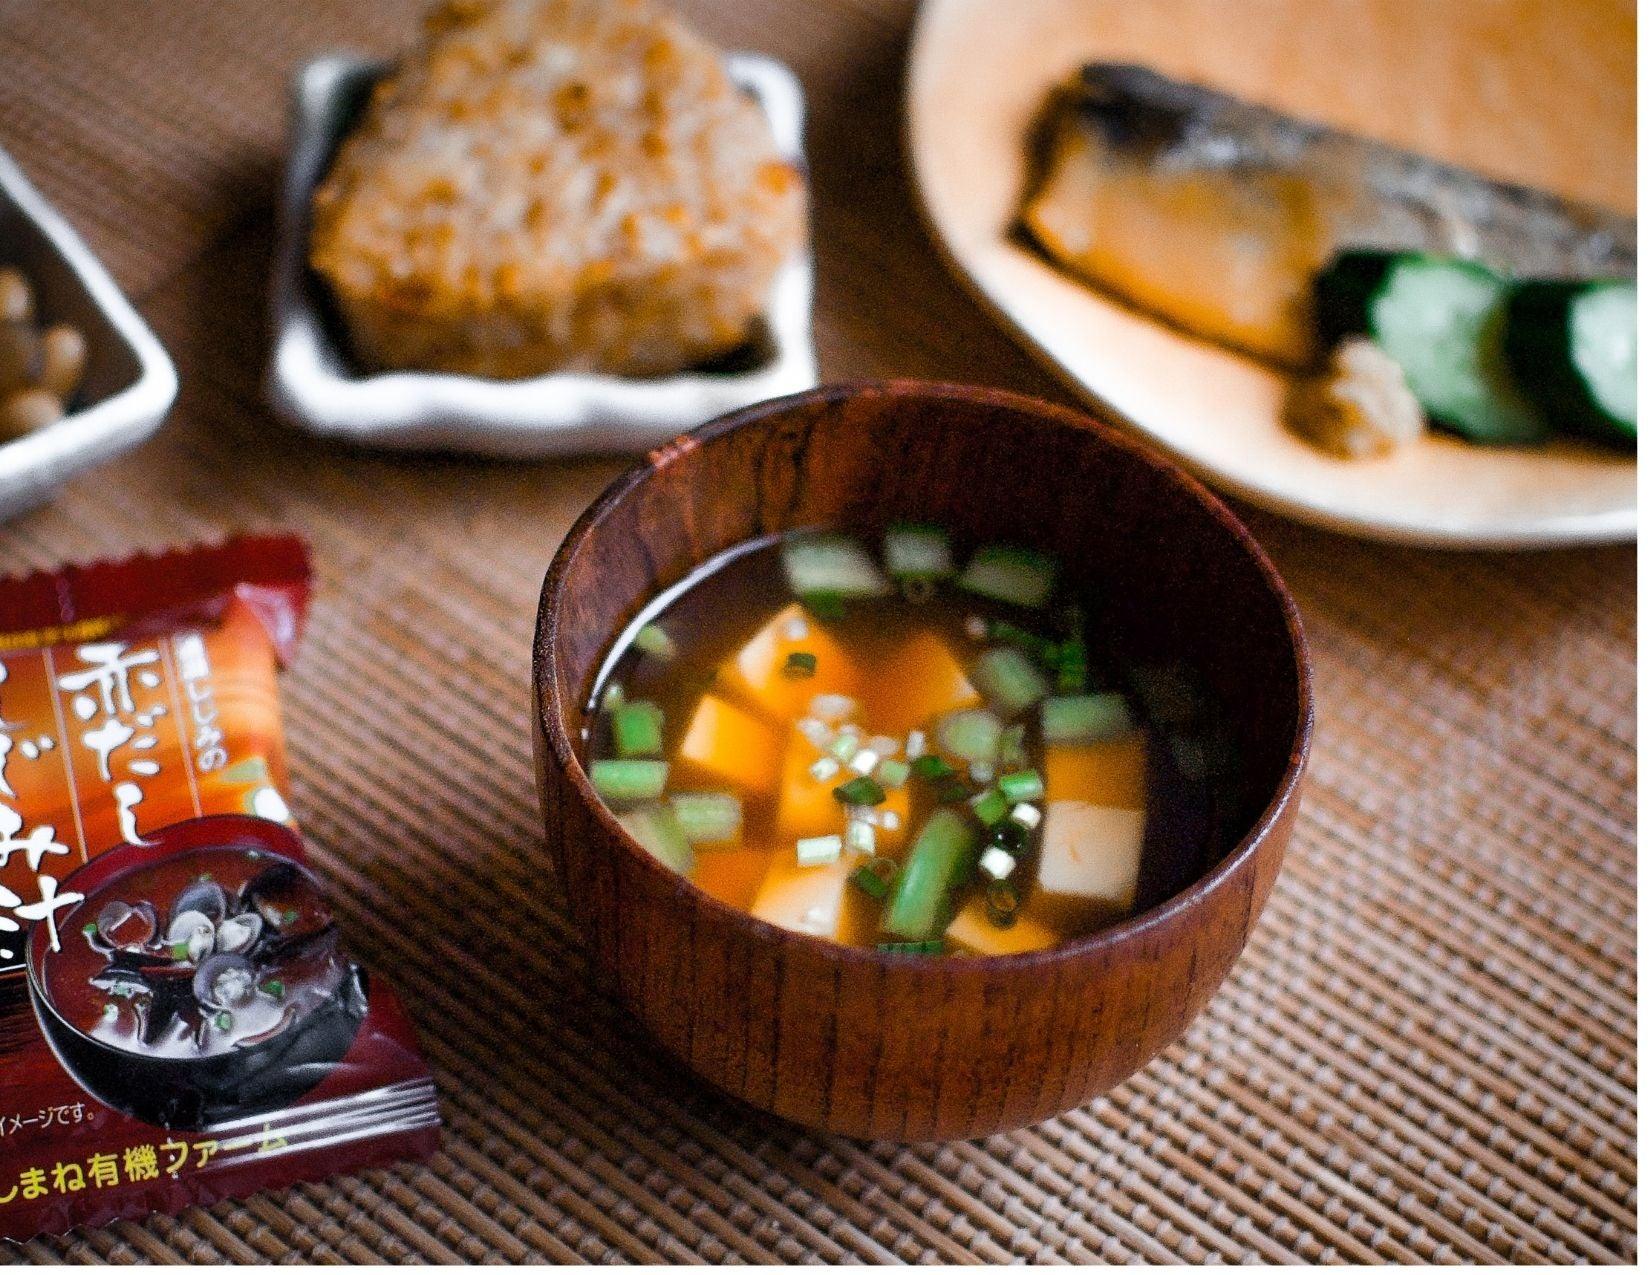 Japan cuisine in famous for its seasonal ingredients and depth of flavor. Choose from our selection of artisanal, all-natural Japanese sides and mains made by local farmers and producers. Orders over US$99 ship free. Worldwide delivery.